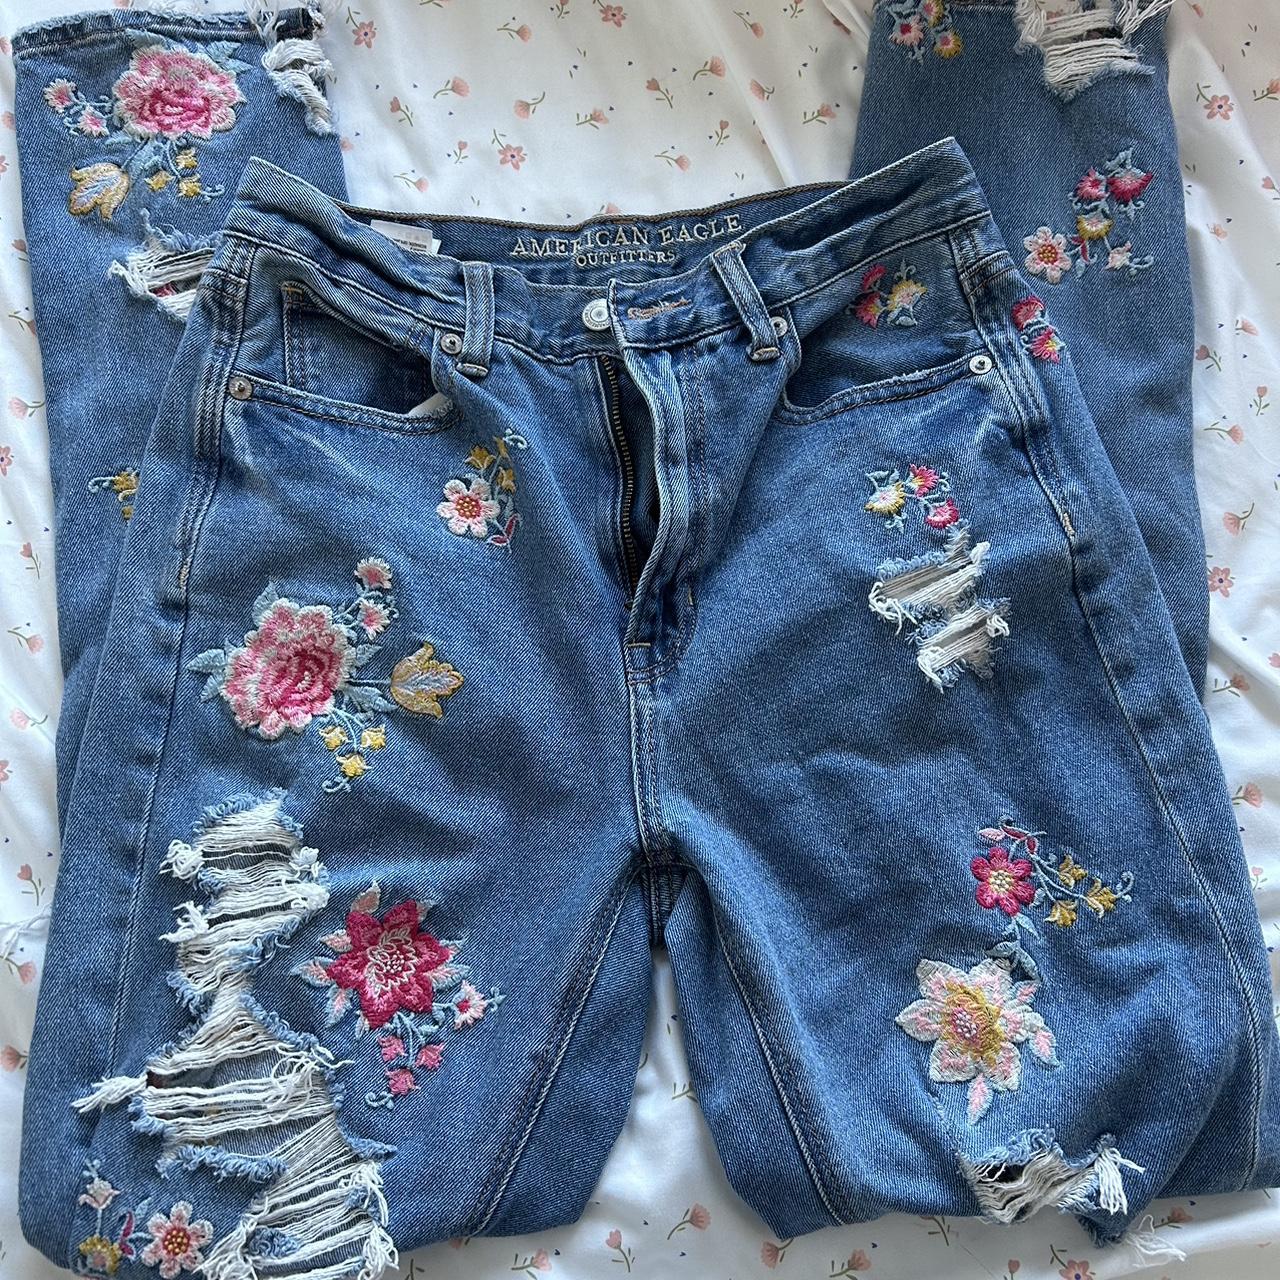 Size 2 long American eagle jeans with embroidered... - Depop